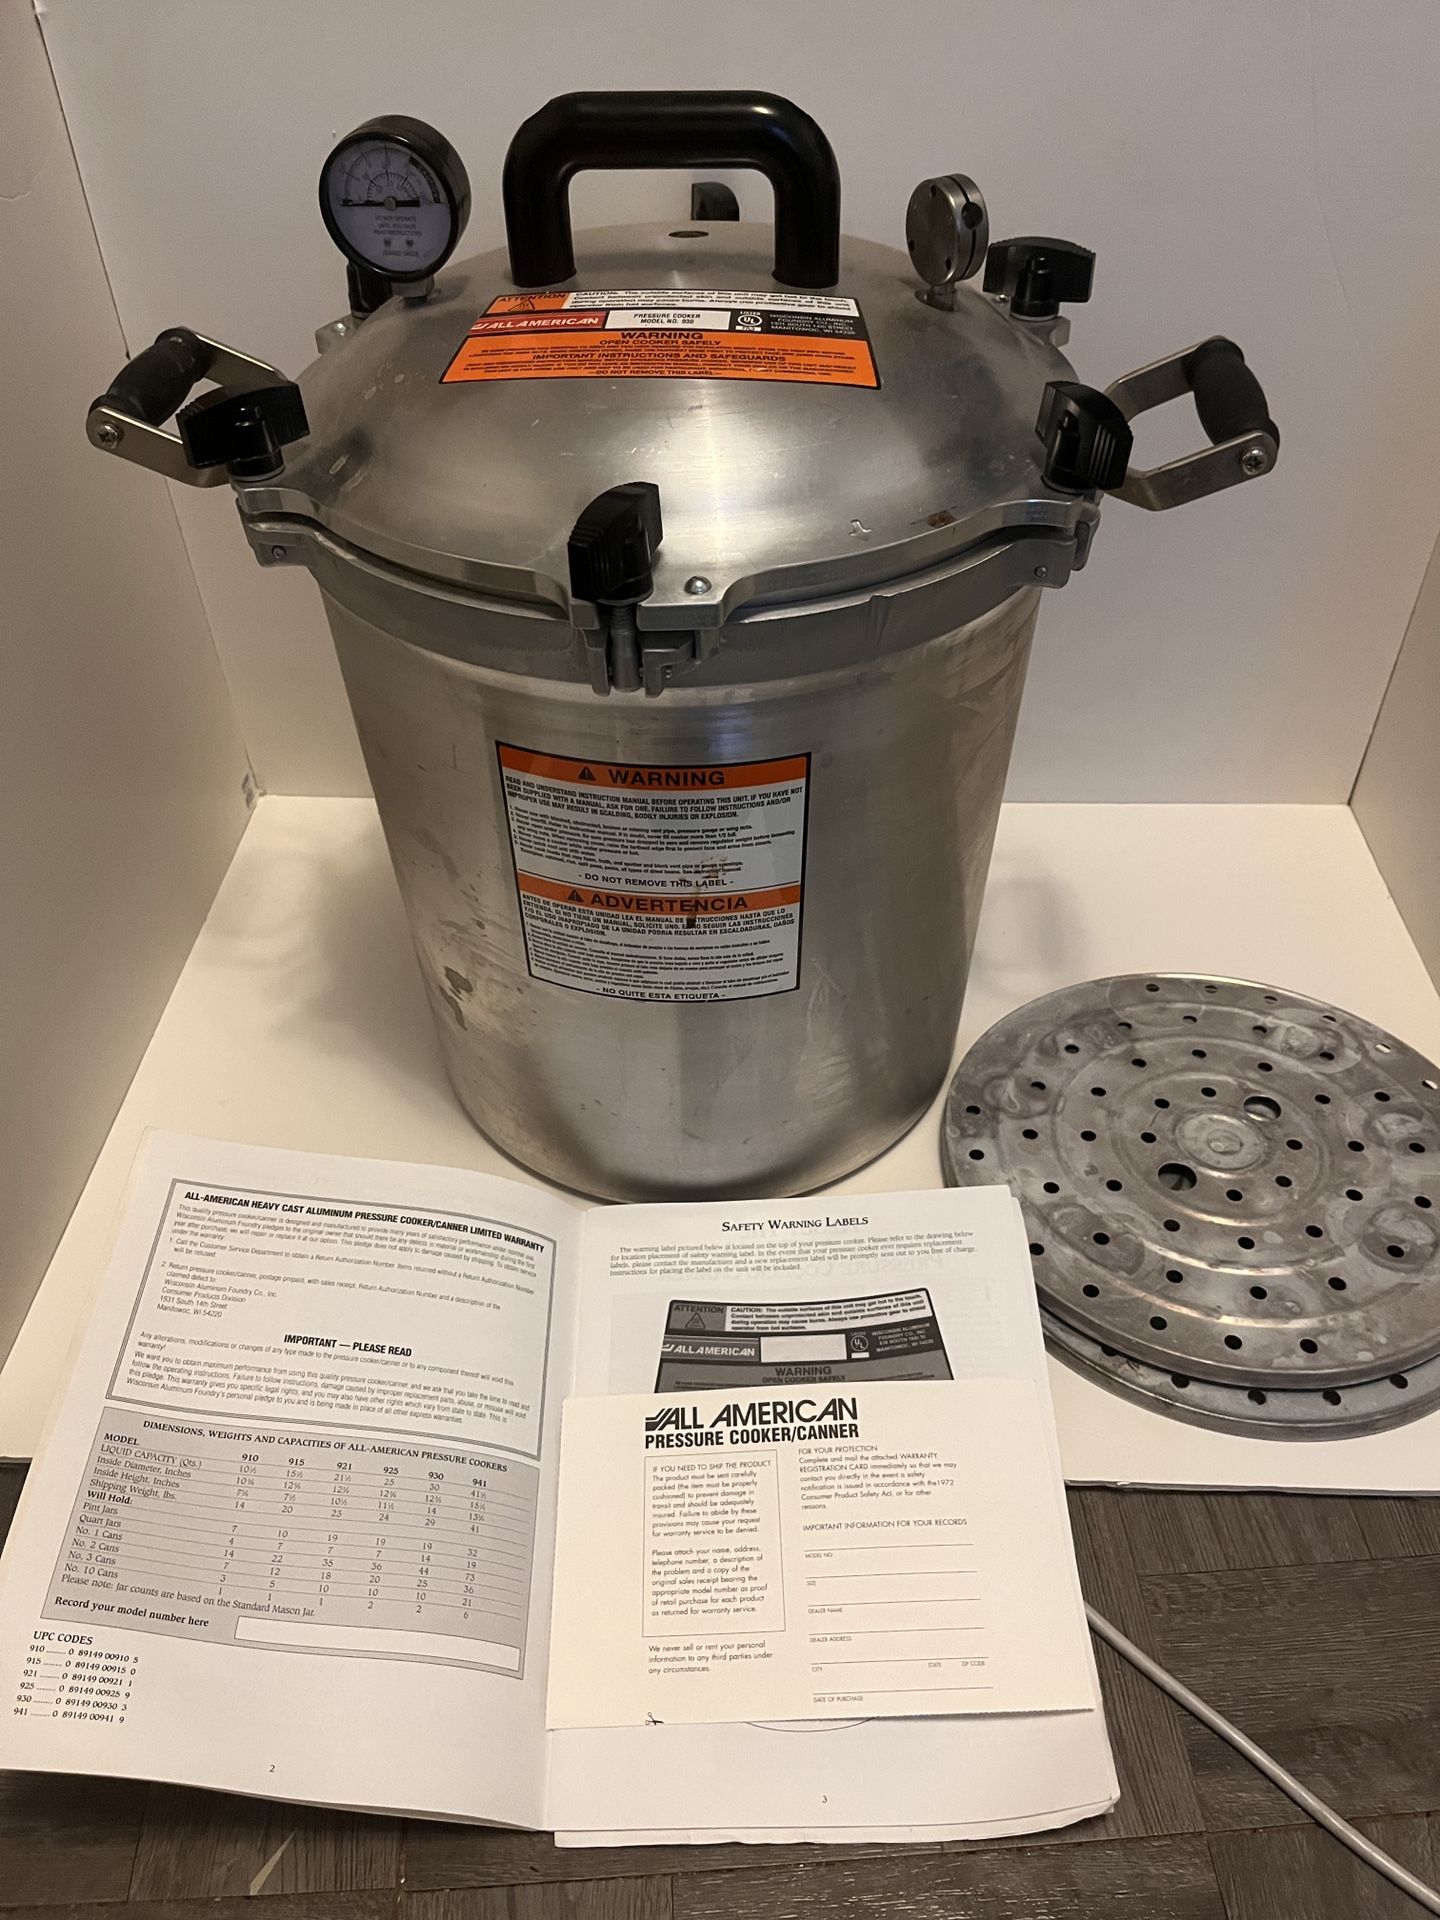 All American Pressure Canner 930 for Sale in Weehawken, NJ - OfferUp